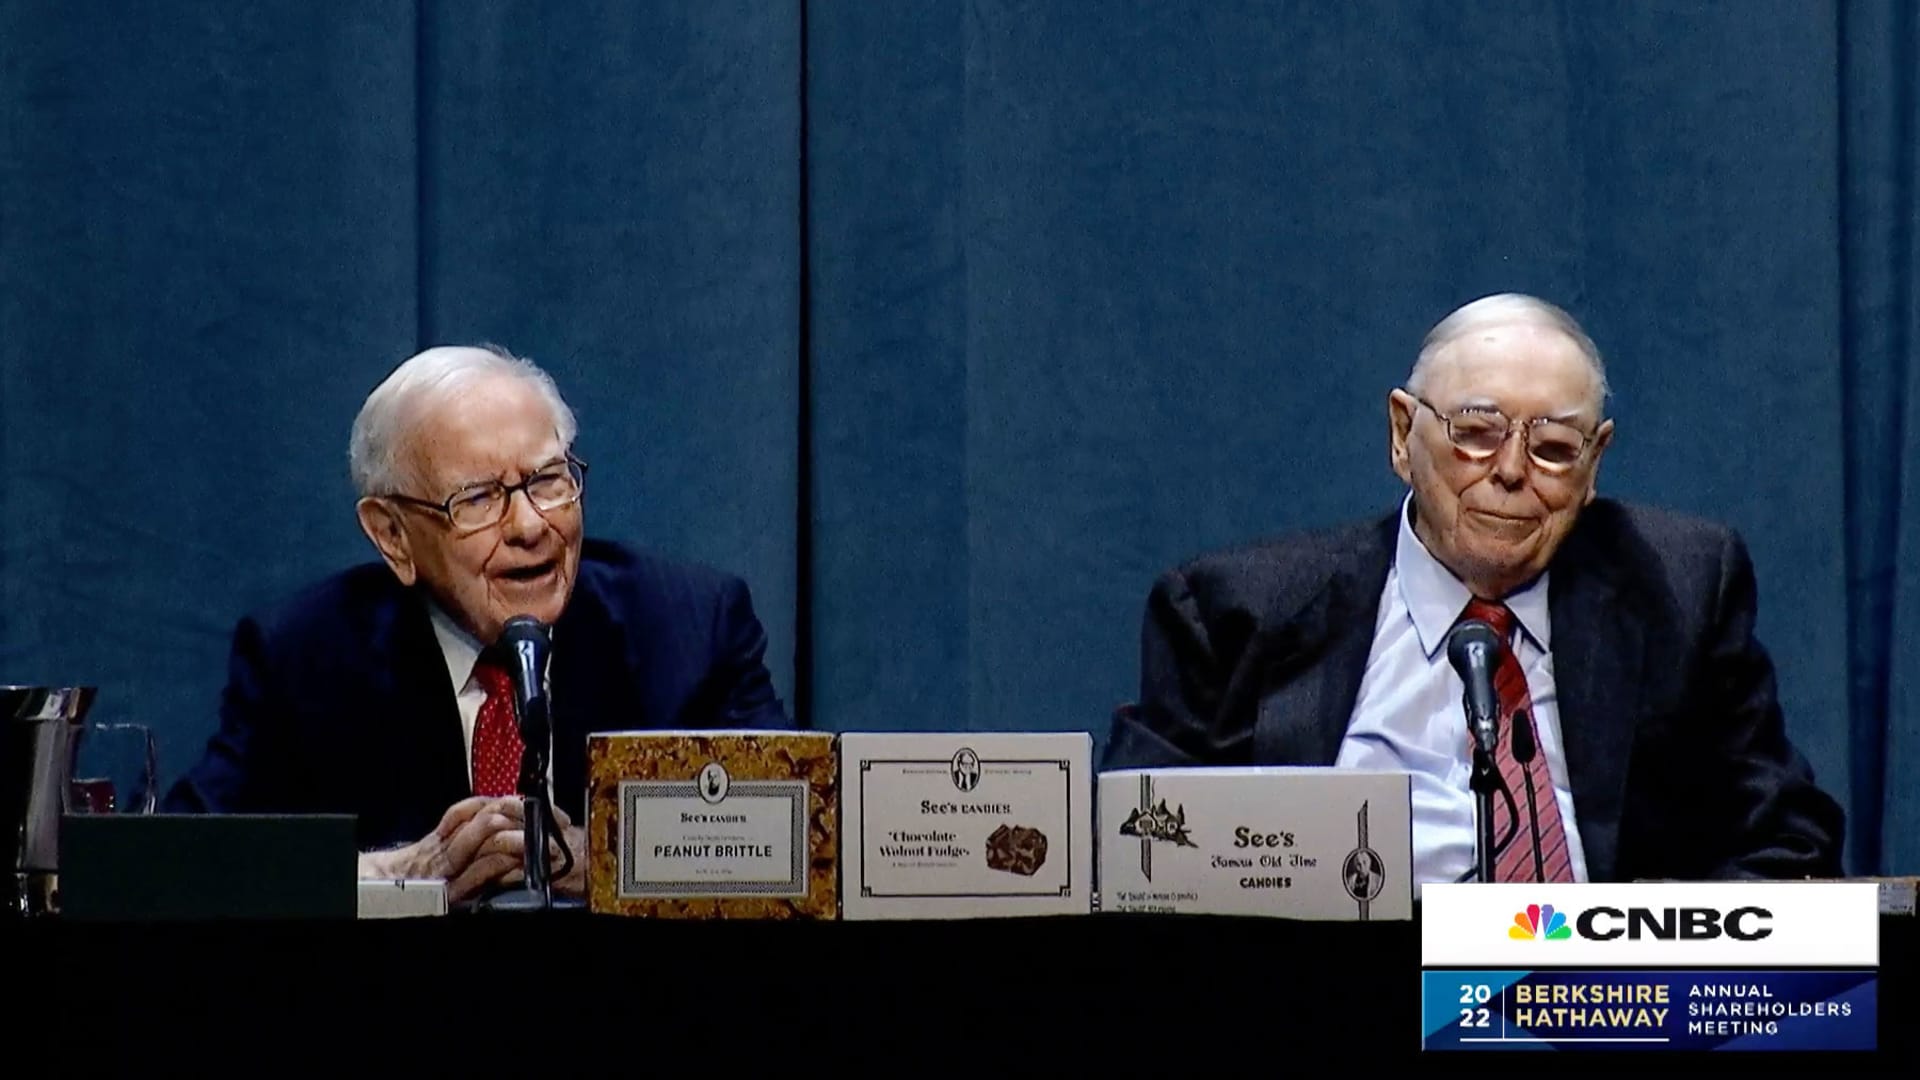 Watch CNBC's lookback at Charlie Munger's life and relationship with Warren Buffett